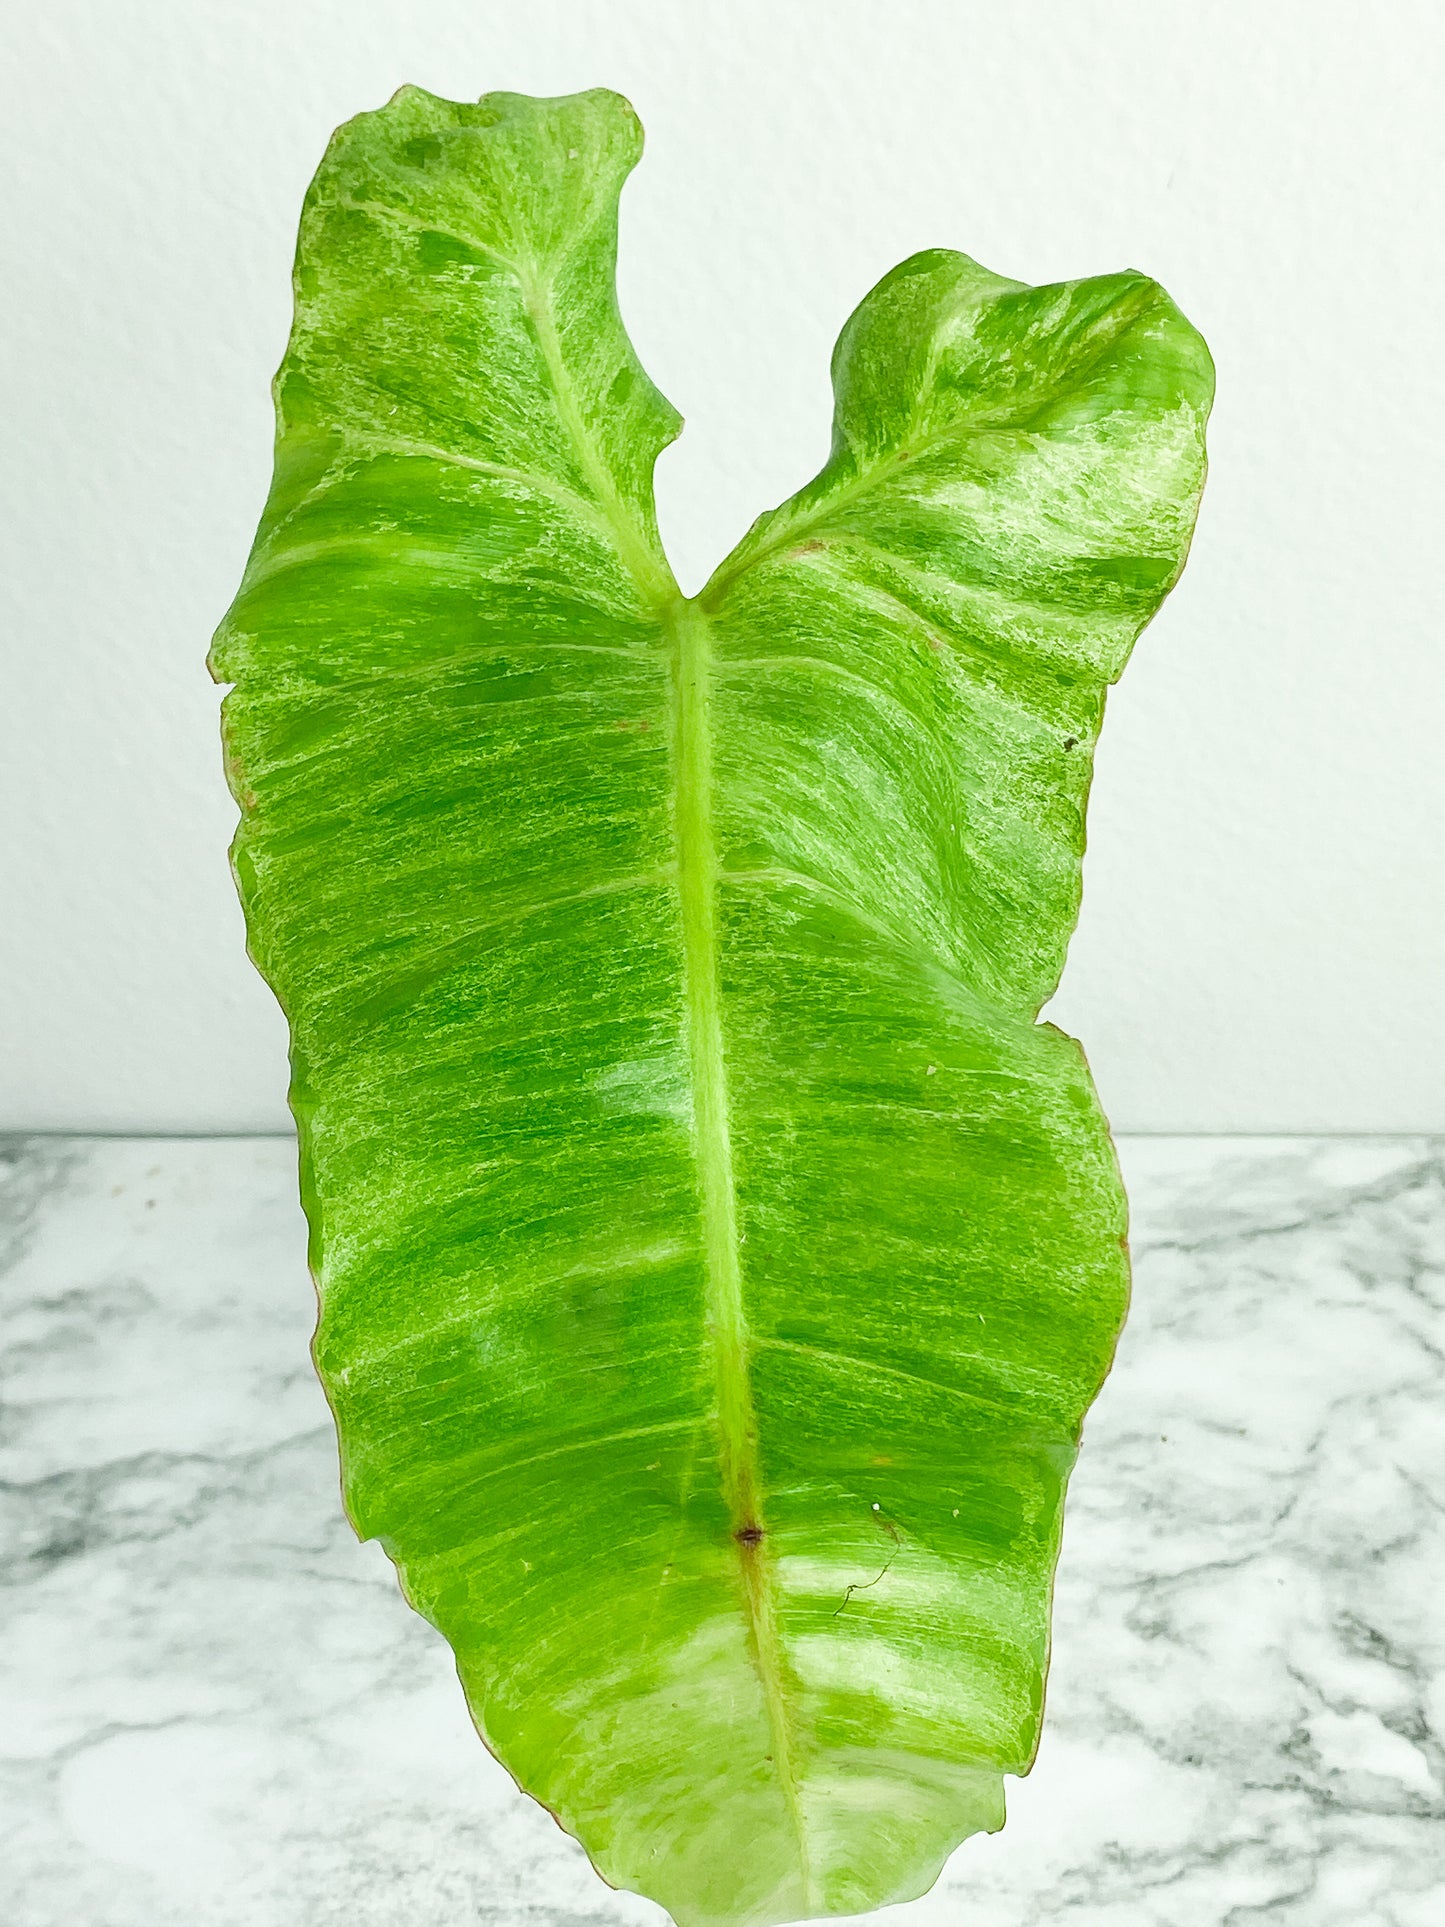 Philodendron Paraiso Verde 1 huge leaf (14" Long) and 1 new sprout. Top cutting